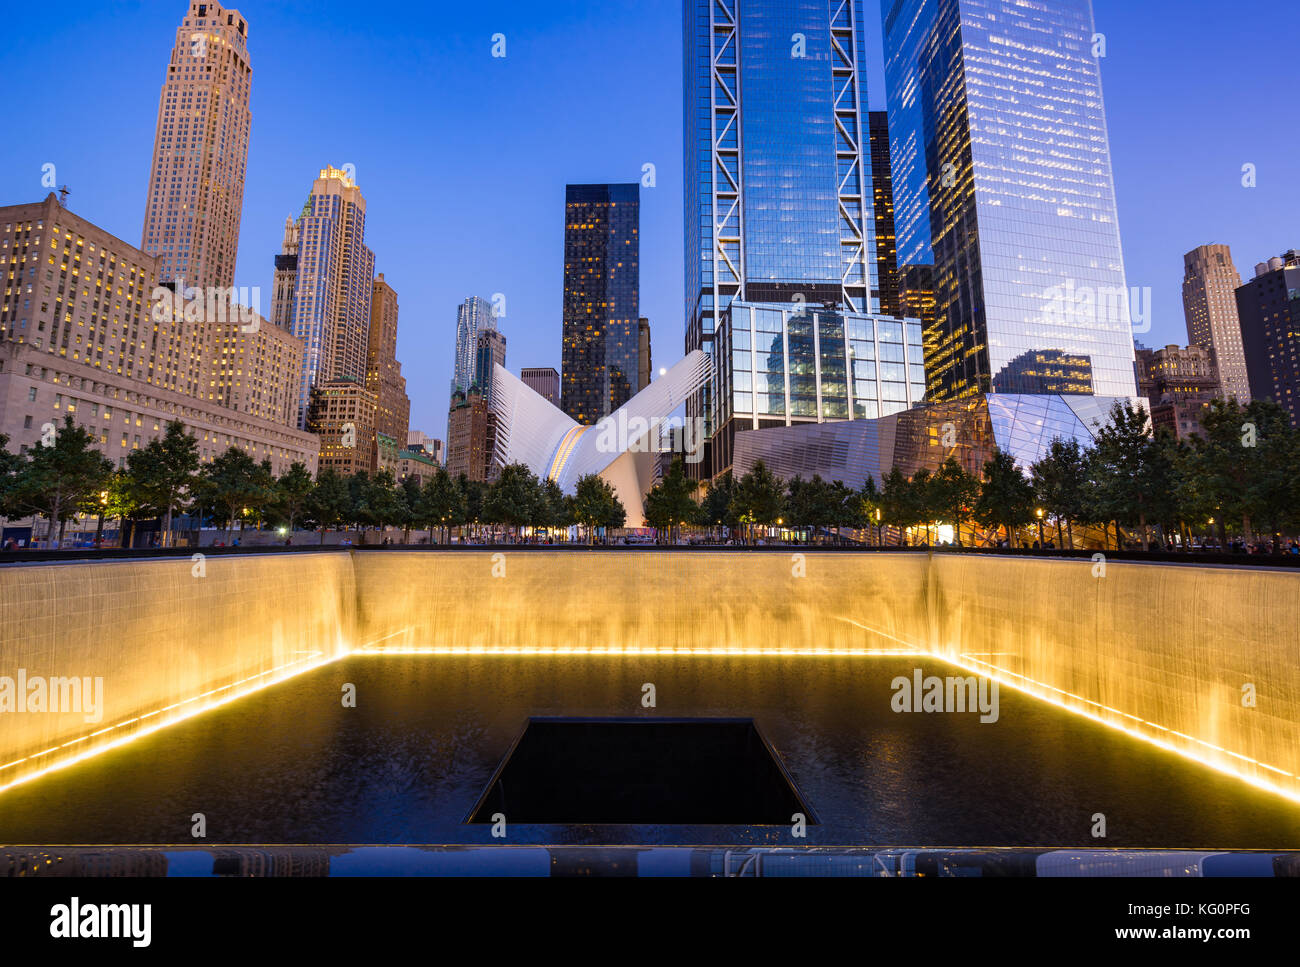 The North Reflecting Pool illuminated at twilight with view of the World Trade Center Tower 3 and 4. Lower Manhattan, 9/11 Memorial & Museum, New York Stock Photo